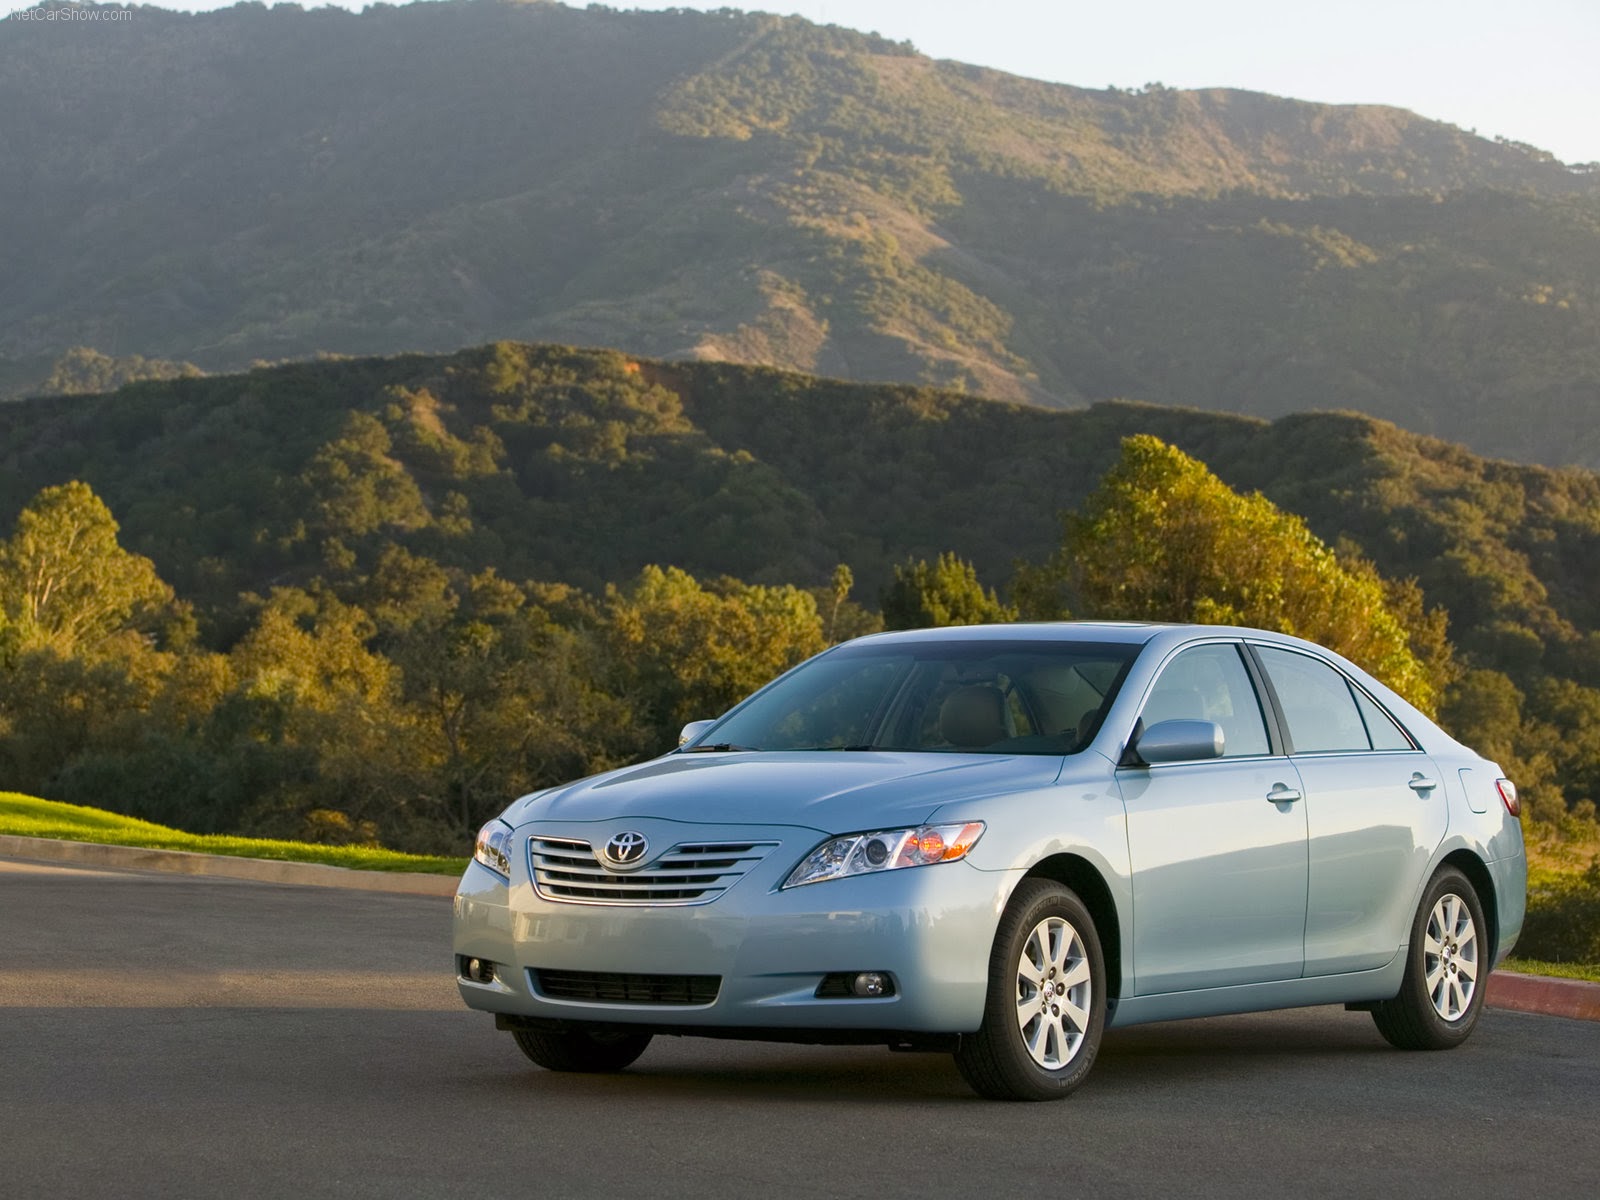 http://www.crazywallpapers.in/2014/02/hd-toyota-camry-pictures.html